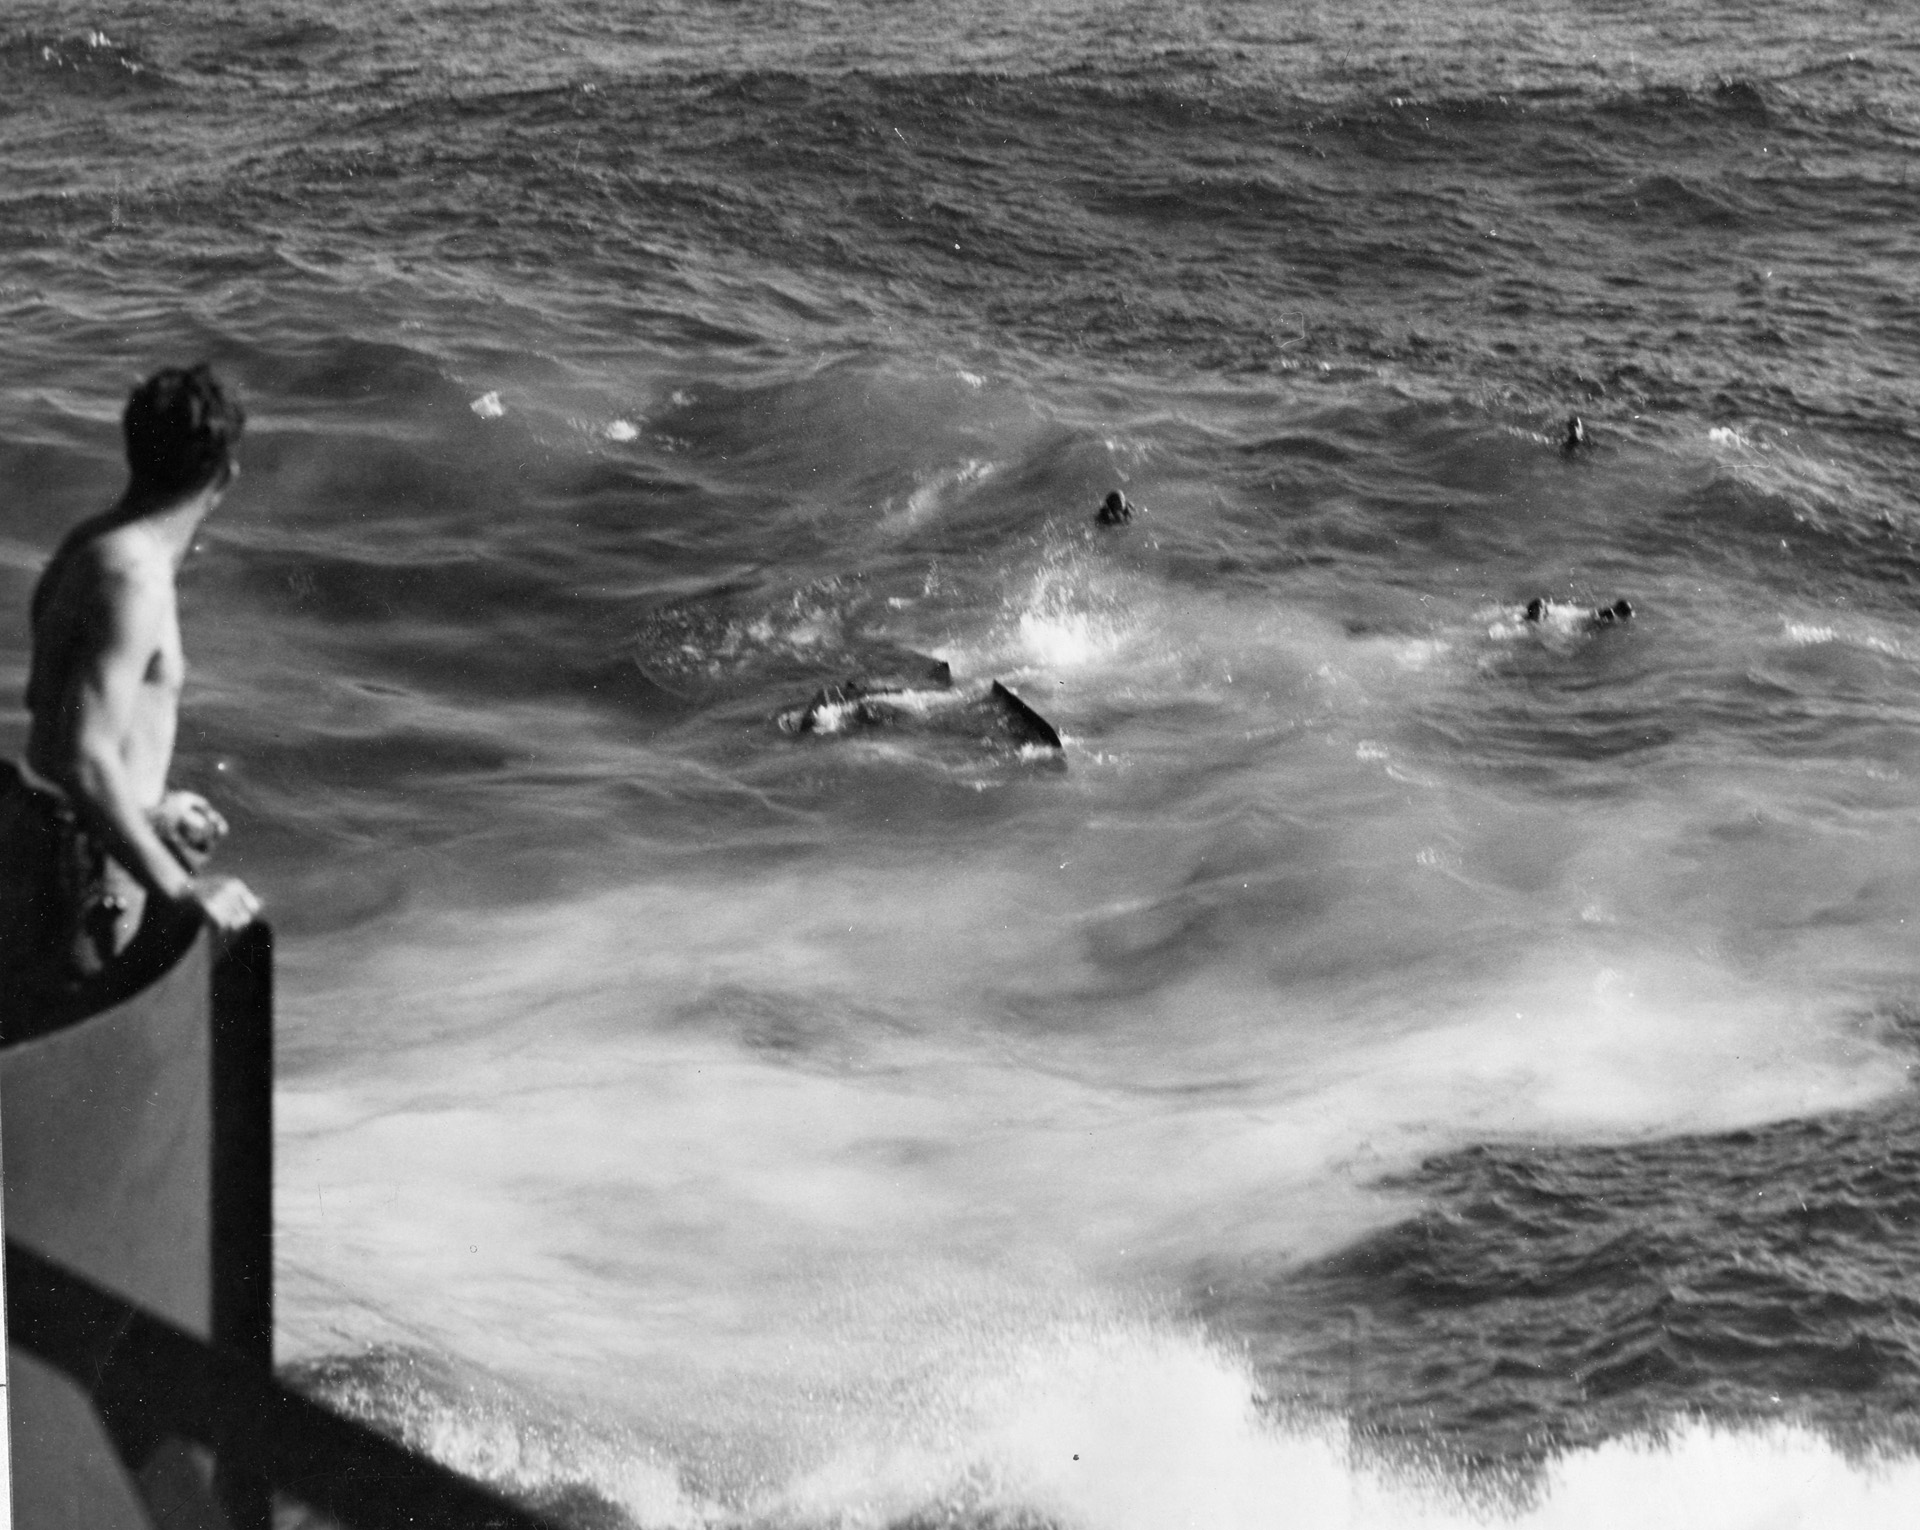 Under the watchful eye of a sailor from the USS Morris, the crew await pick up as the bomber sinks, tail last.